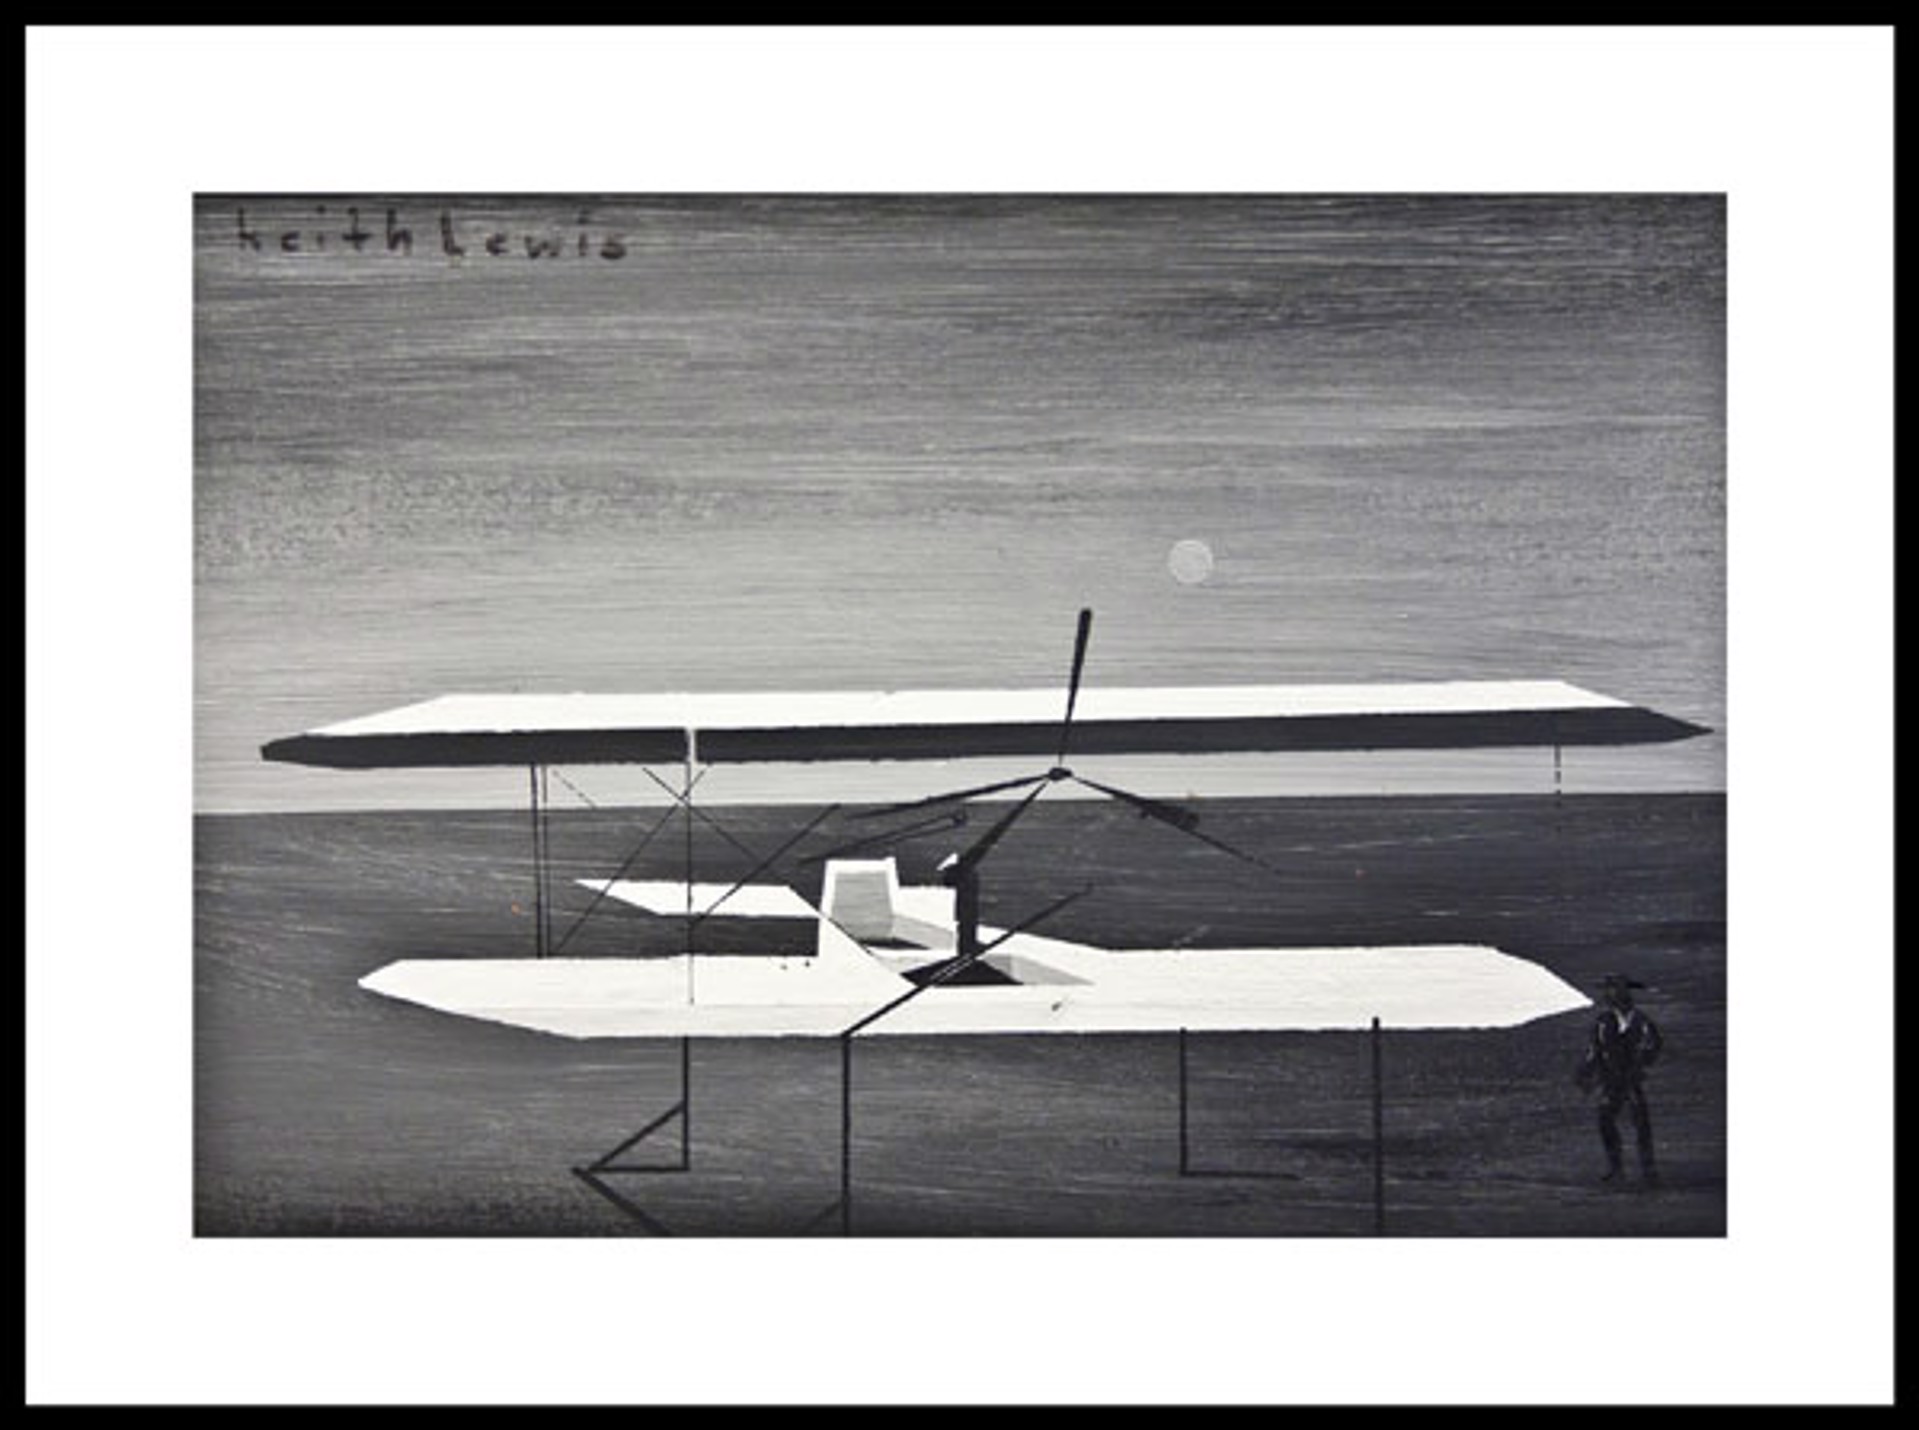 First Wright Flight by Keith Lewis